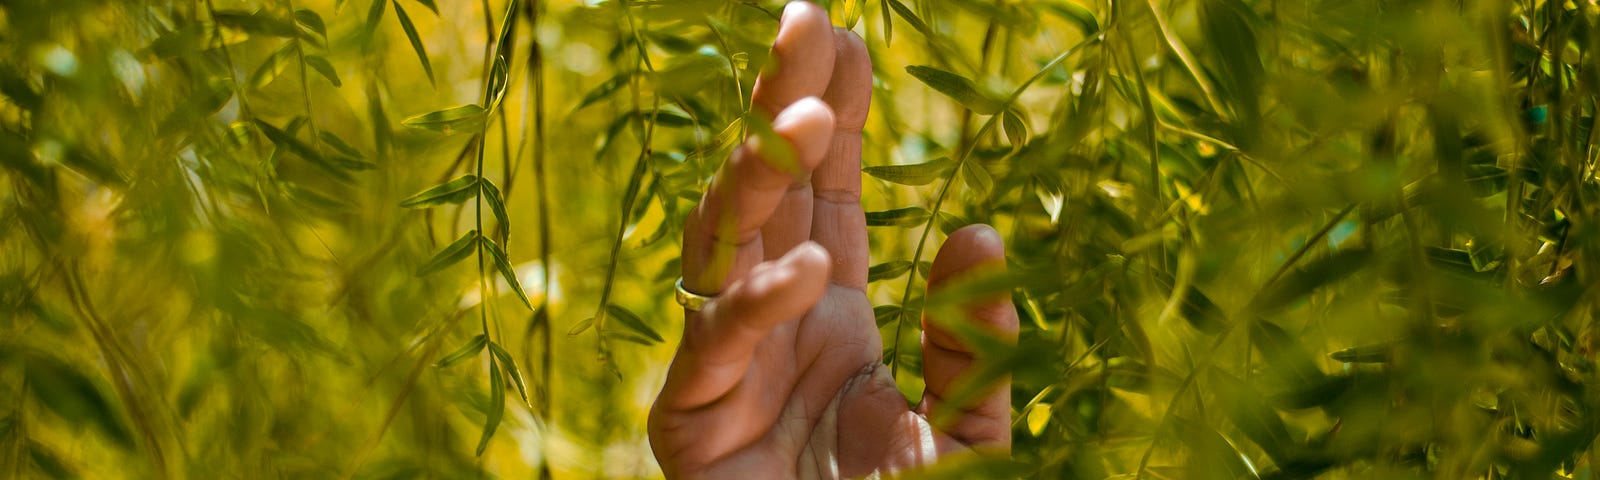 Hand lovingly touching some leaves